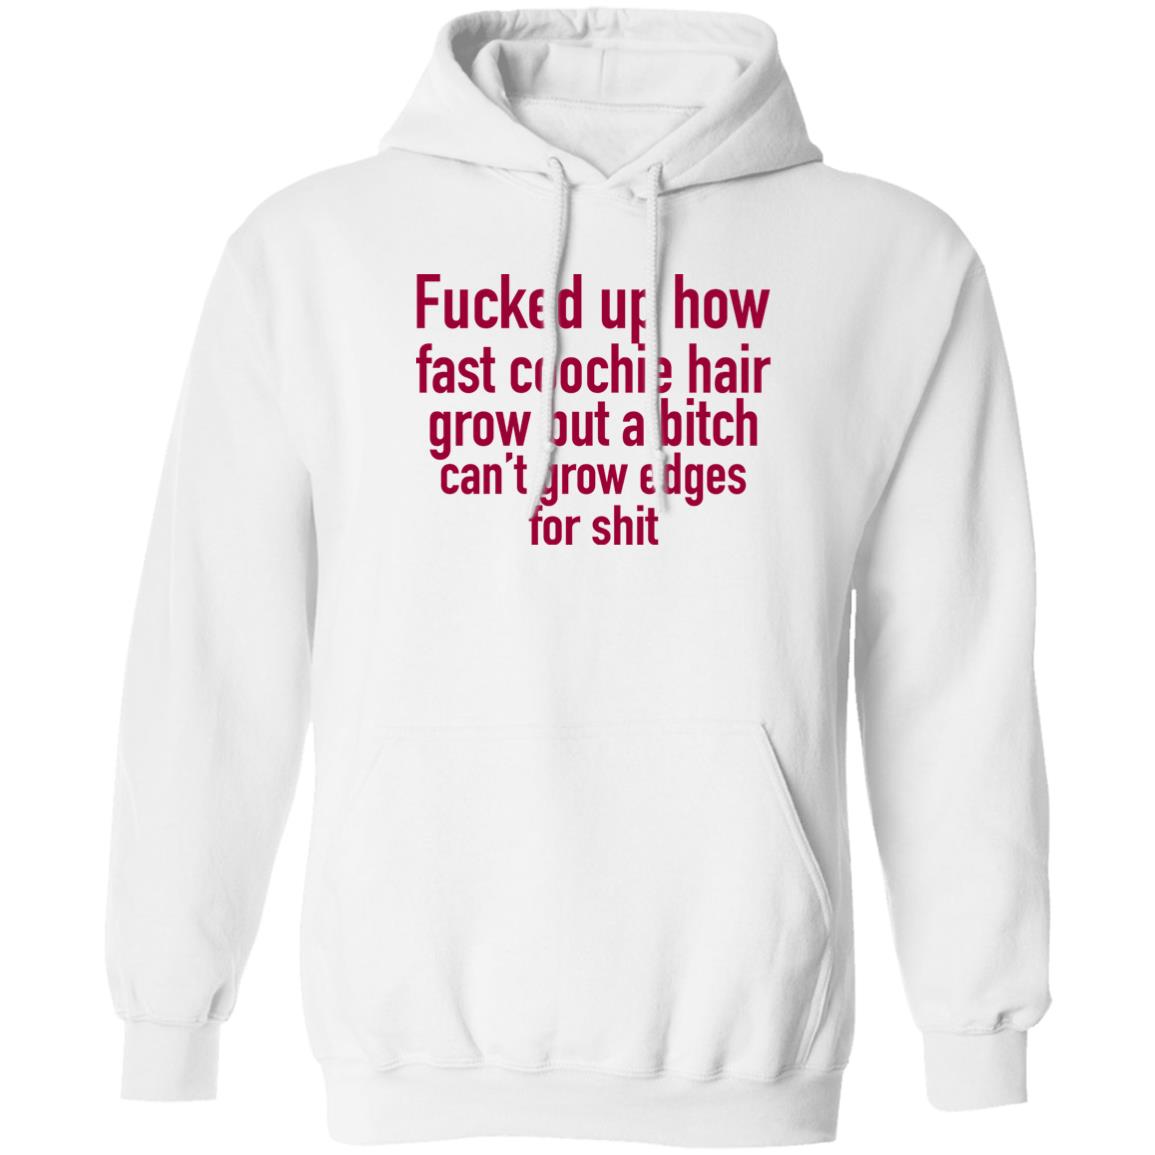 Villain Allmighty Fucked Up How Fast Coochie Hair Grow But A Bitch Can't Grow Edges For Shit Shirt